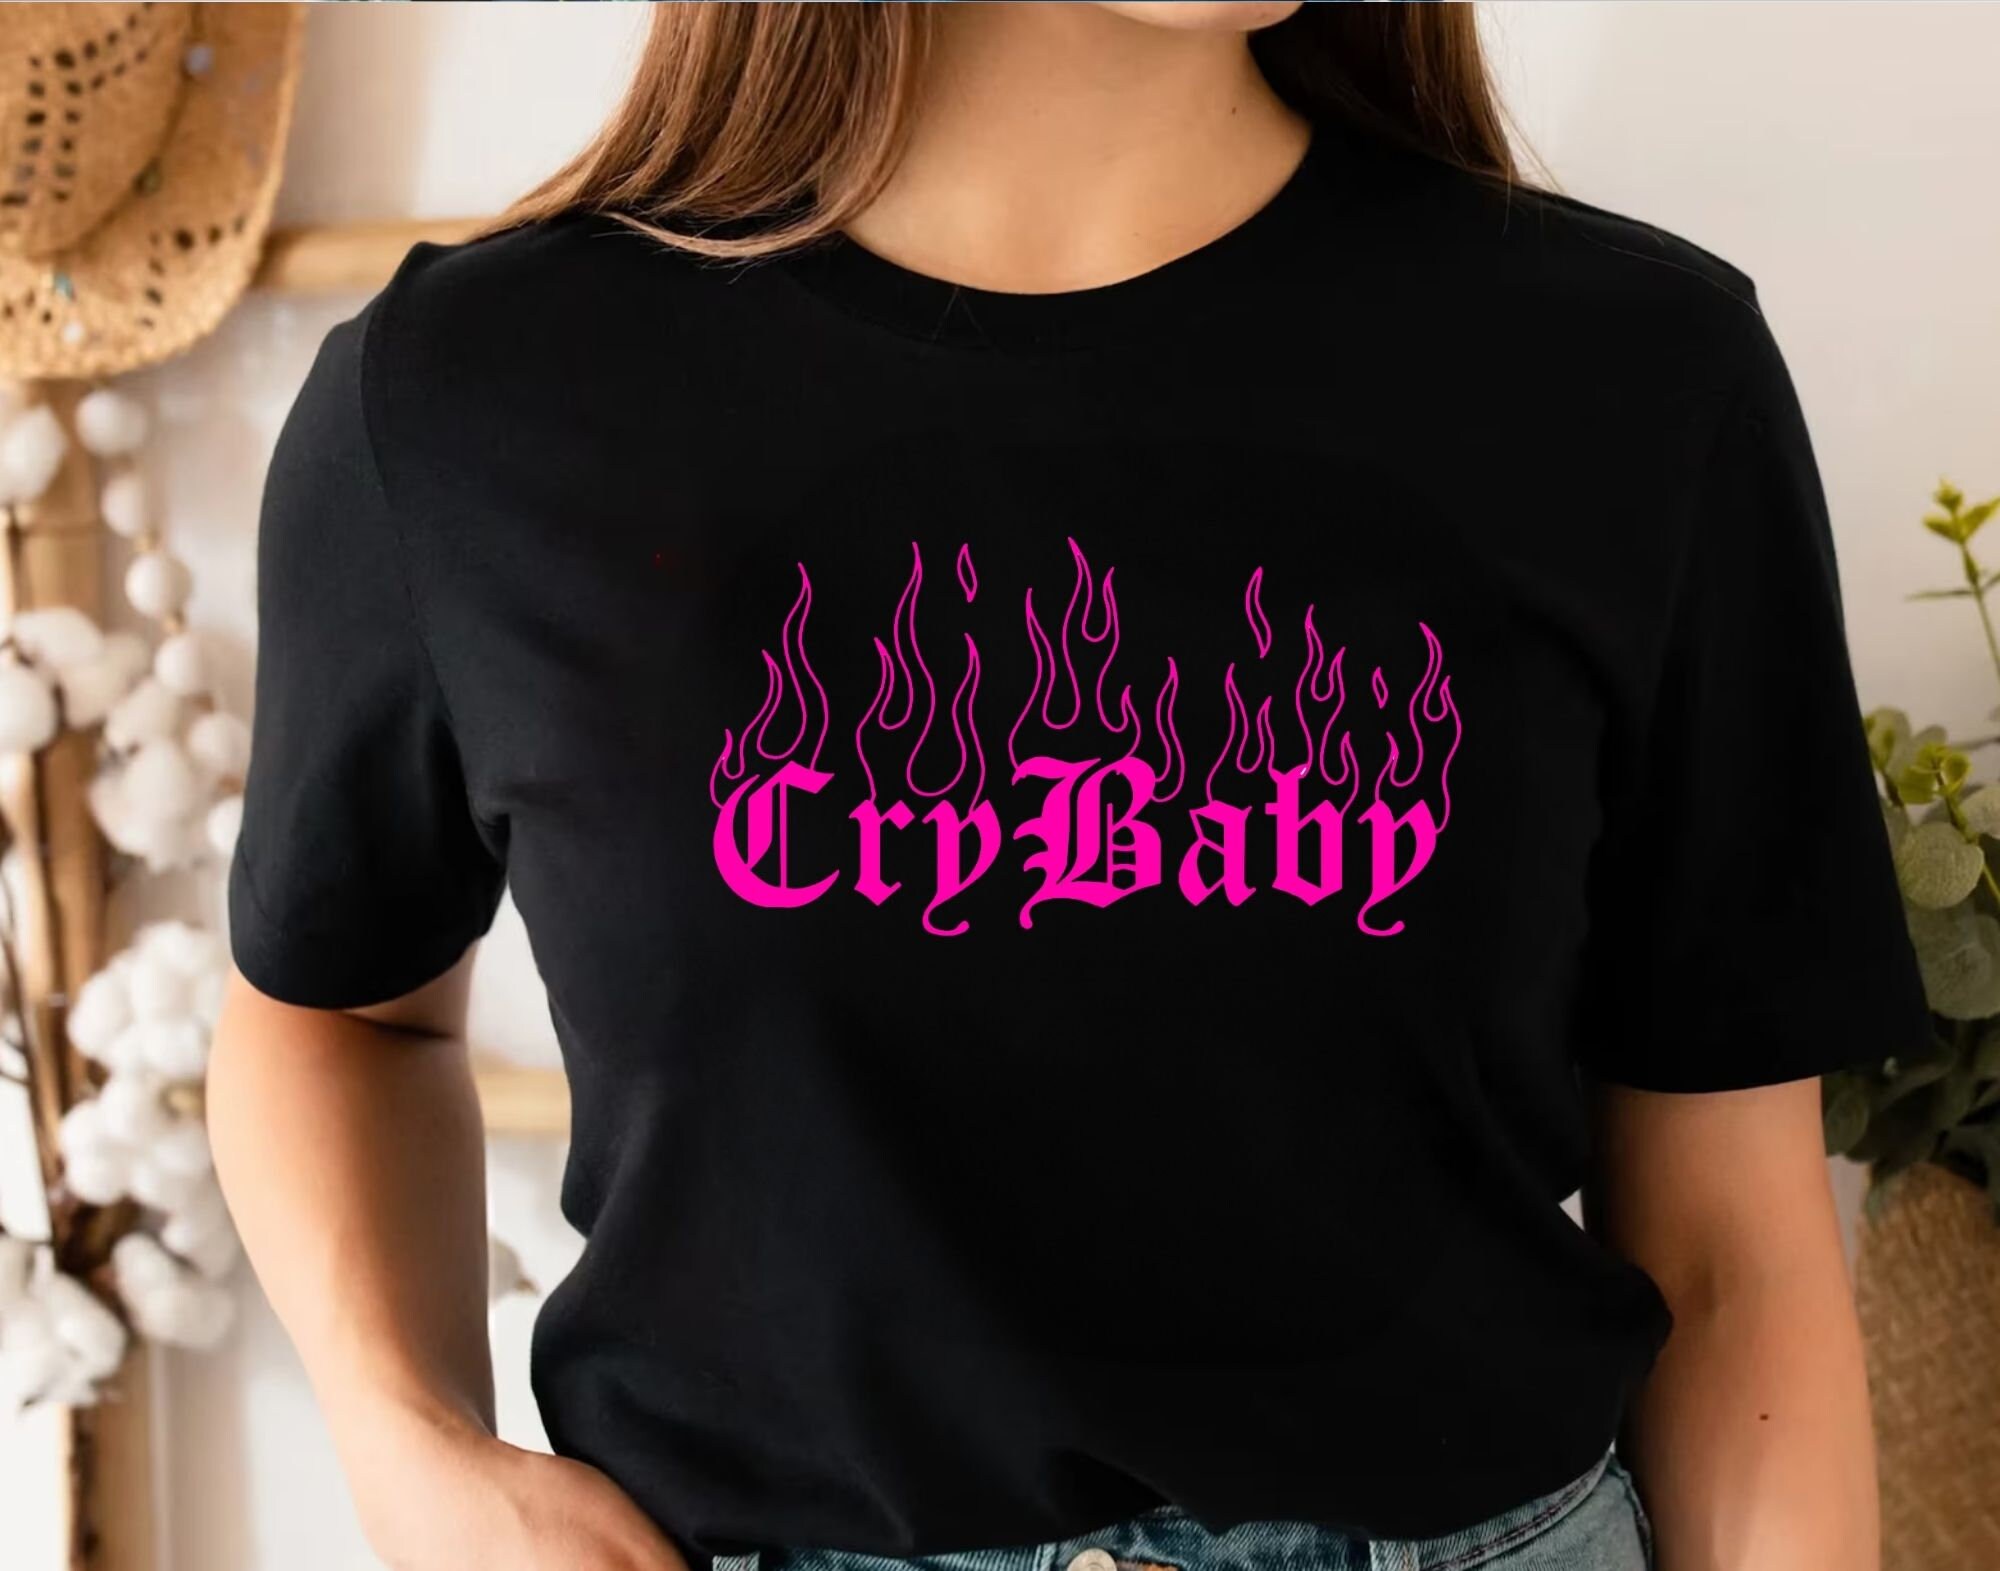 Girls Don`t Cry RINGER BABY TEE-